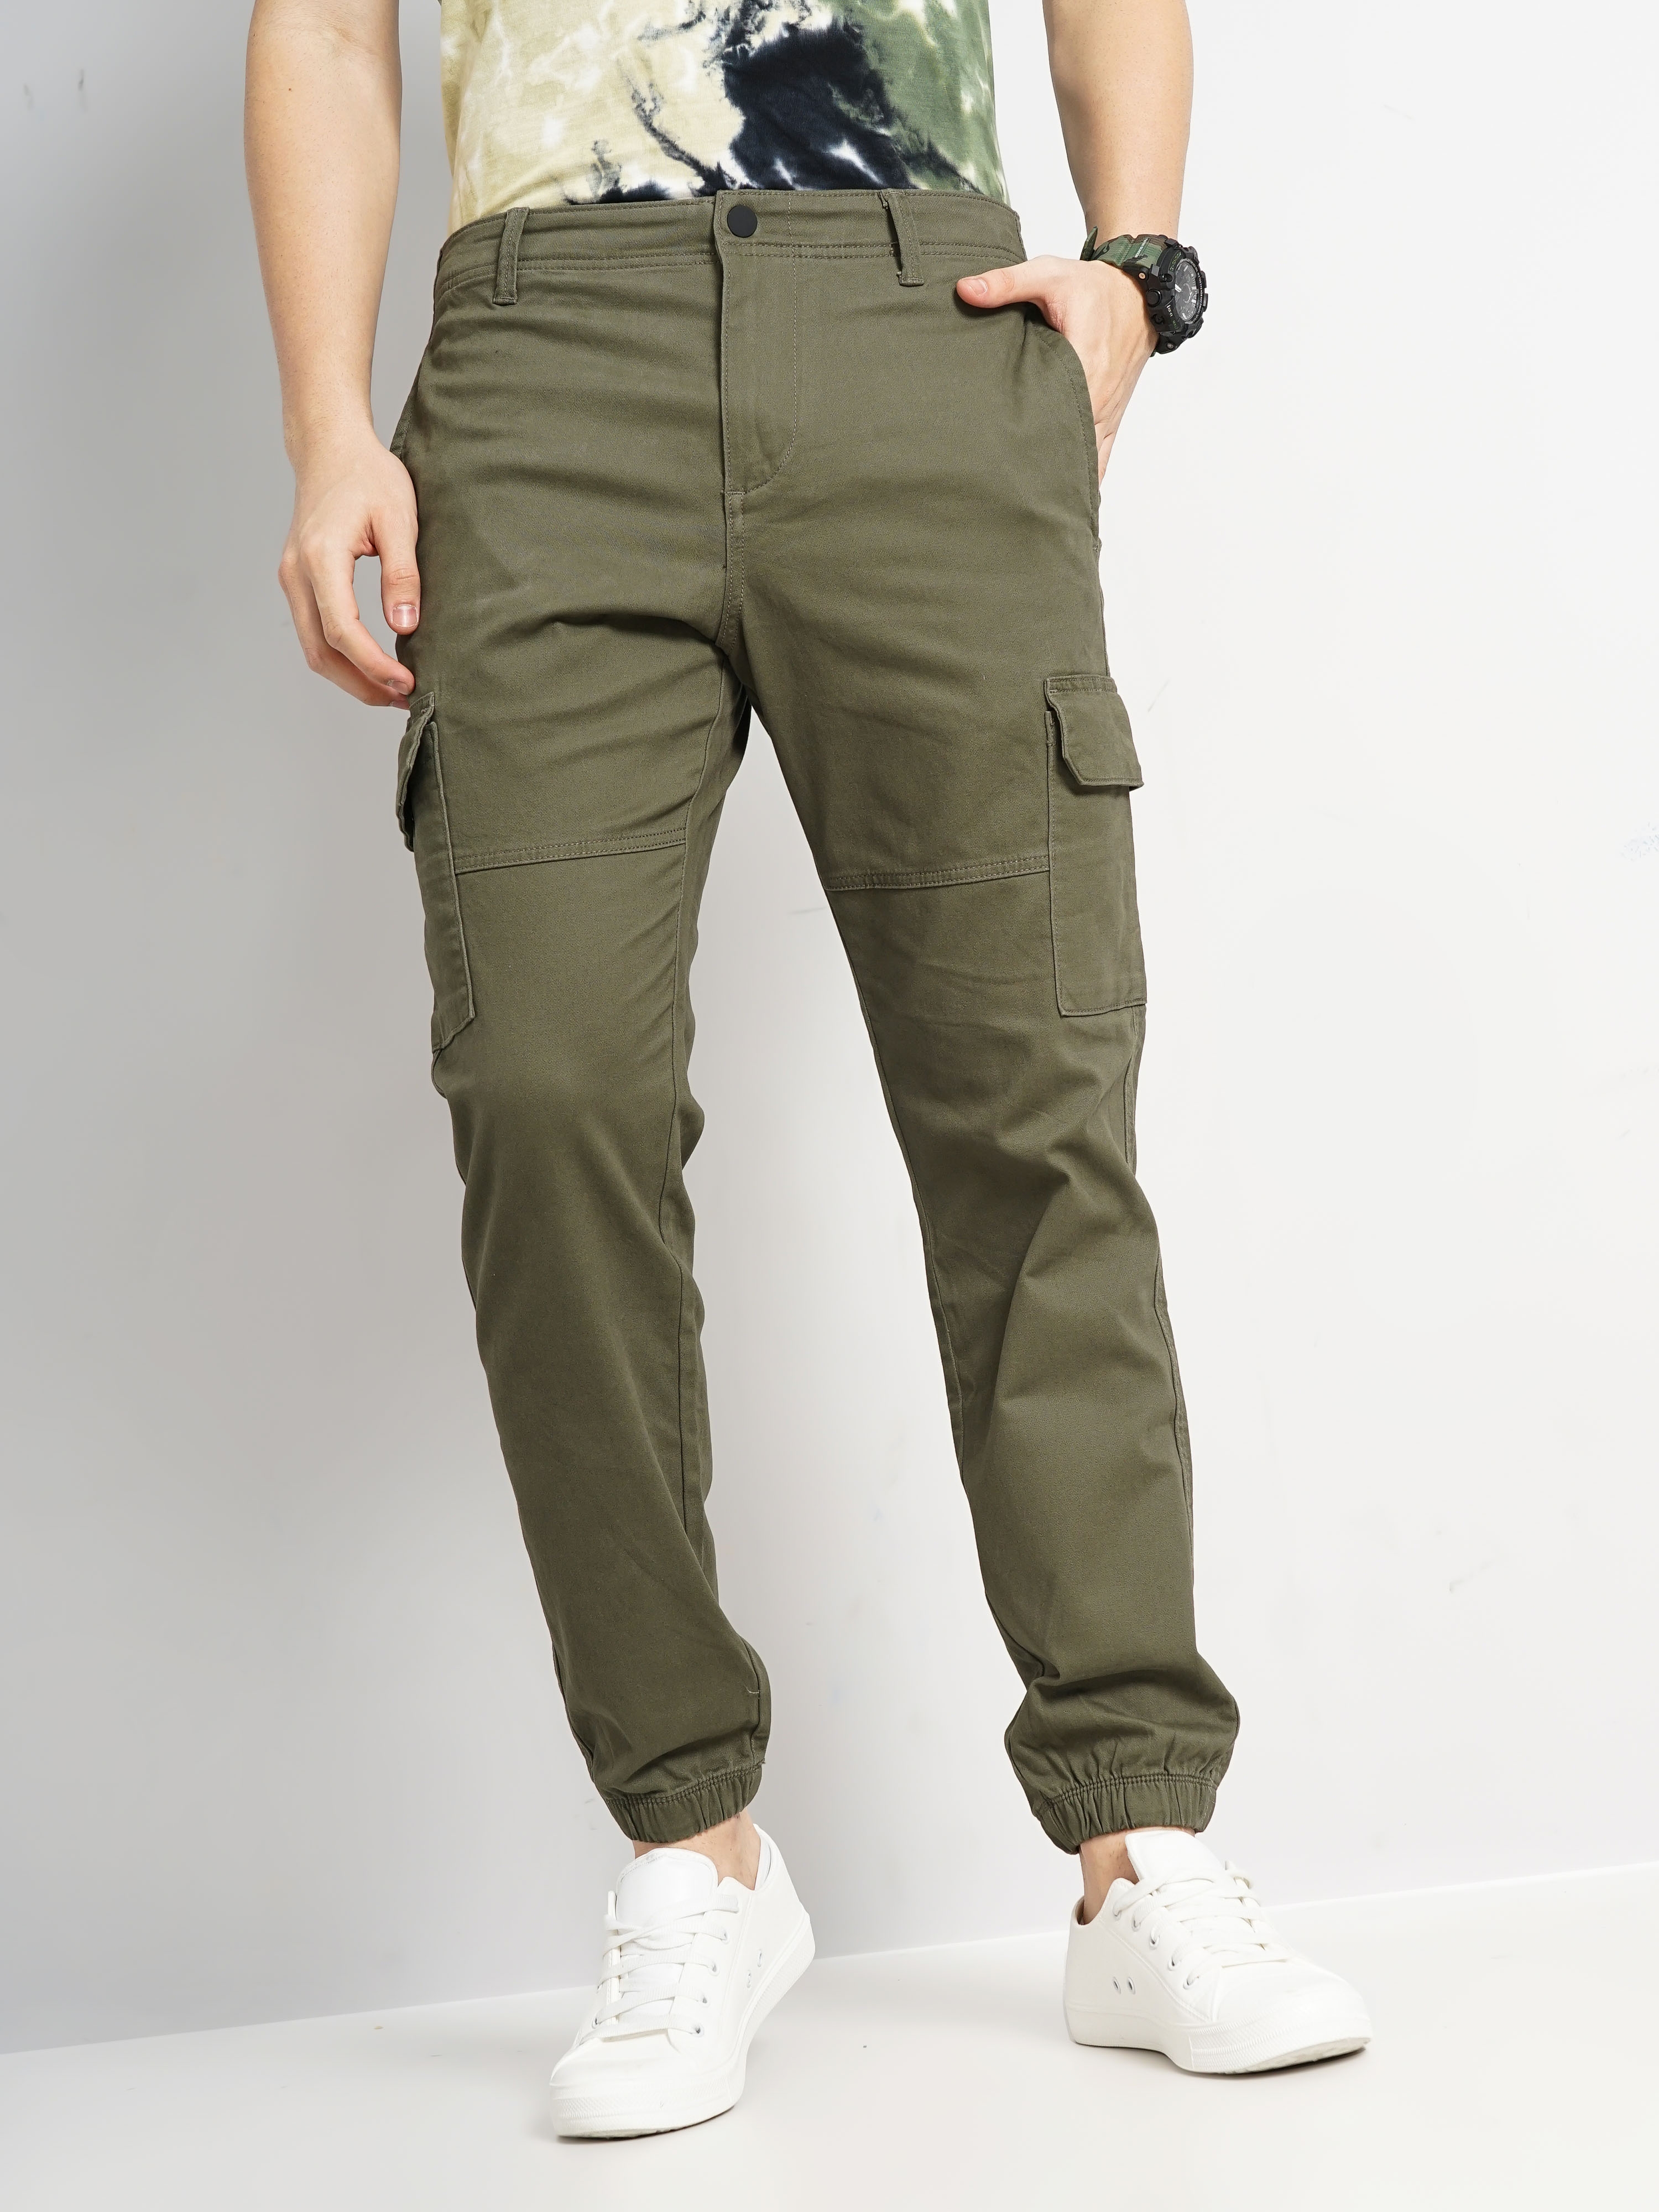 Buy Olive Green Trousers & Pants for Men by CELIO Online | Ajio.com